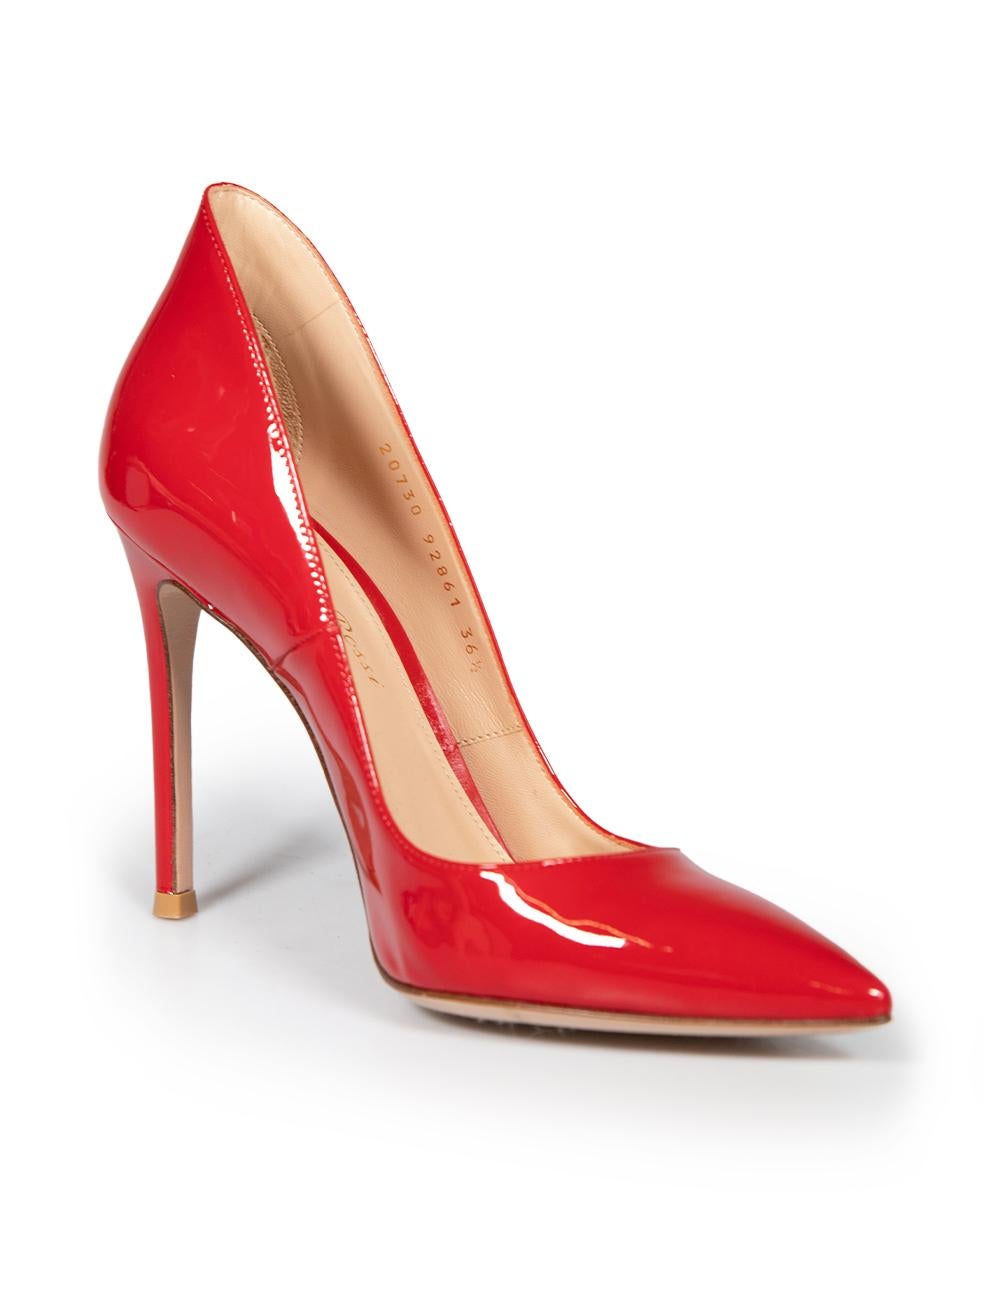 CONDITION is Very good. Minimal wear to heels is seen with a black mark on the right heel is visible and some abrasions inside the heel tab is evident on this used Gianvito Rossi designer resale item.
 
 
 
 Details
 
 
 Red
 
 Patent leather
 
